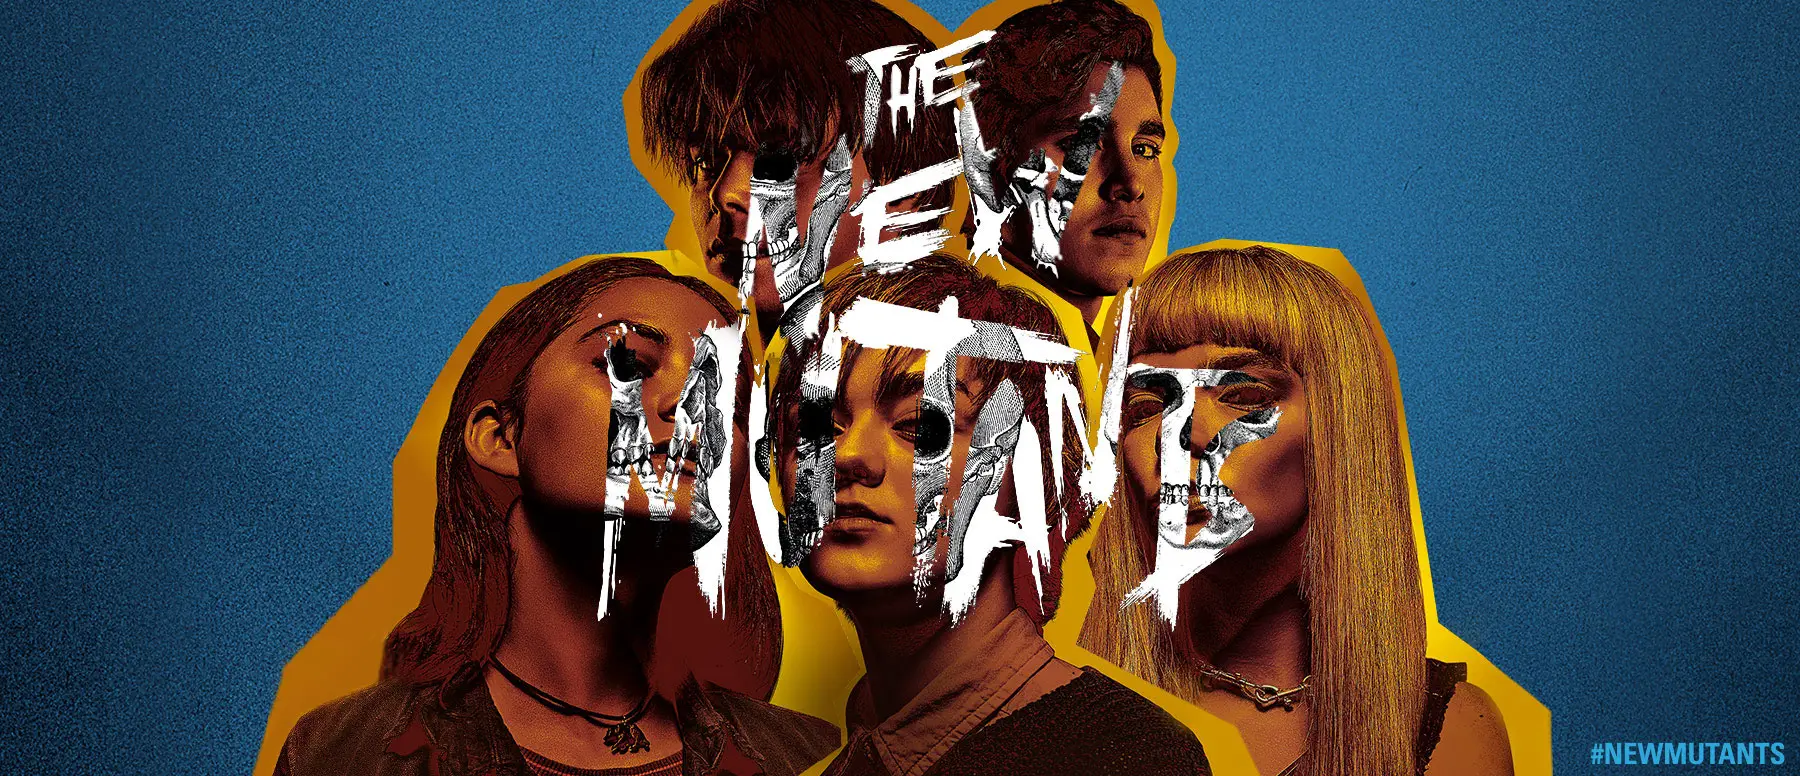 What to Expect from The New Mutants - MarvelBlog.com